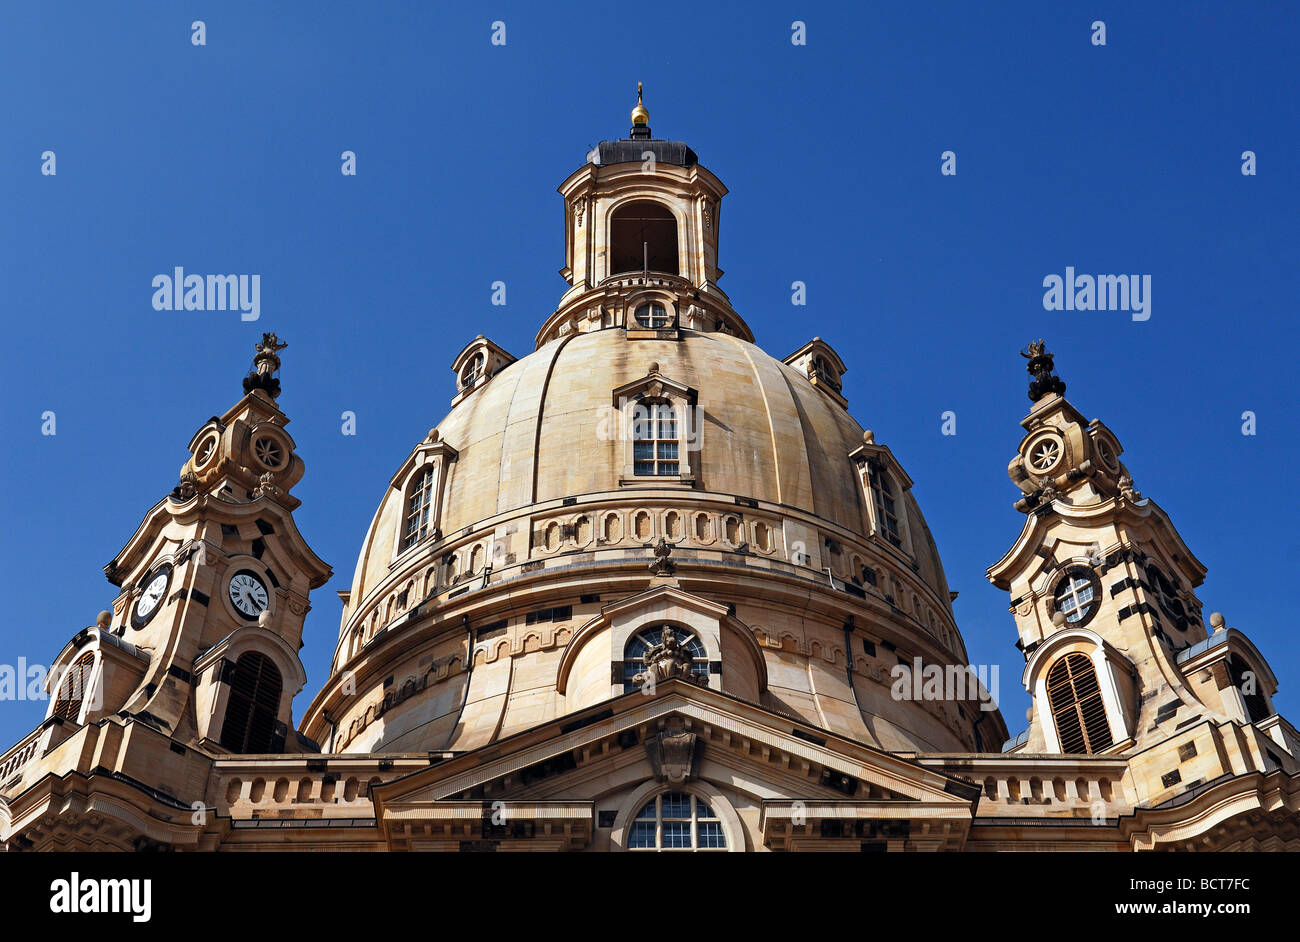 Dome of Frauenkirche, Church of Our Lady, against a blue sky at Neumarkt square, Dresden, Saxony, Germany, Europe Stock Photo